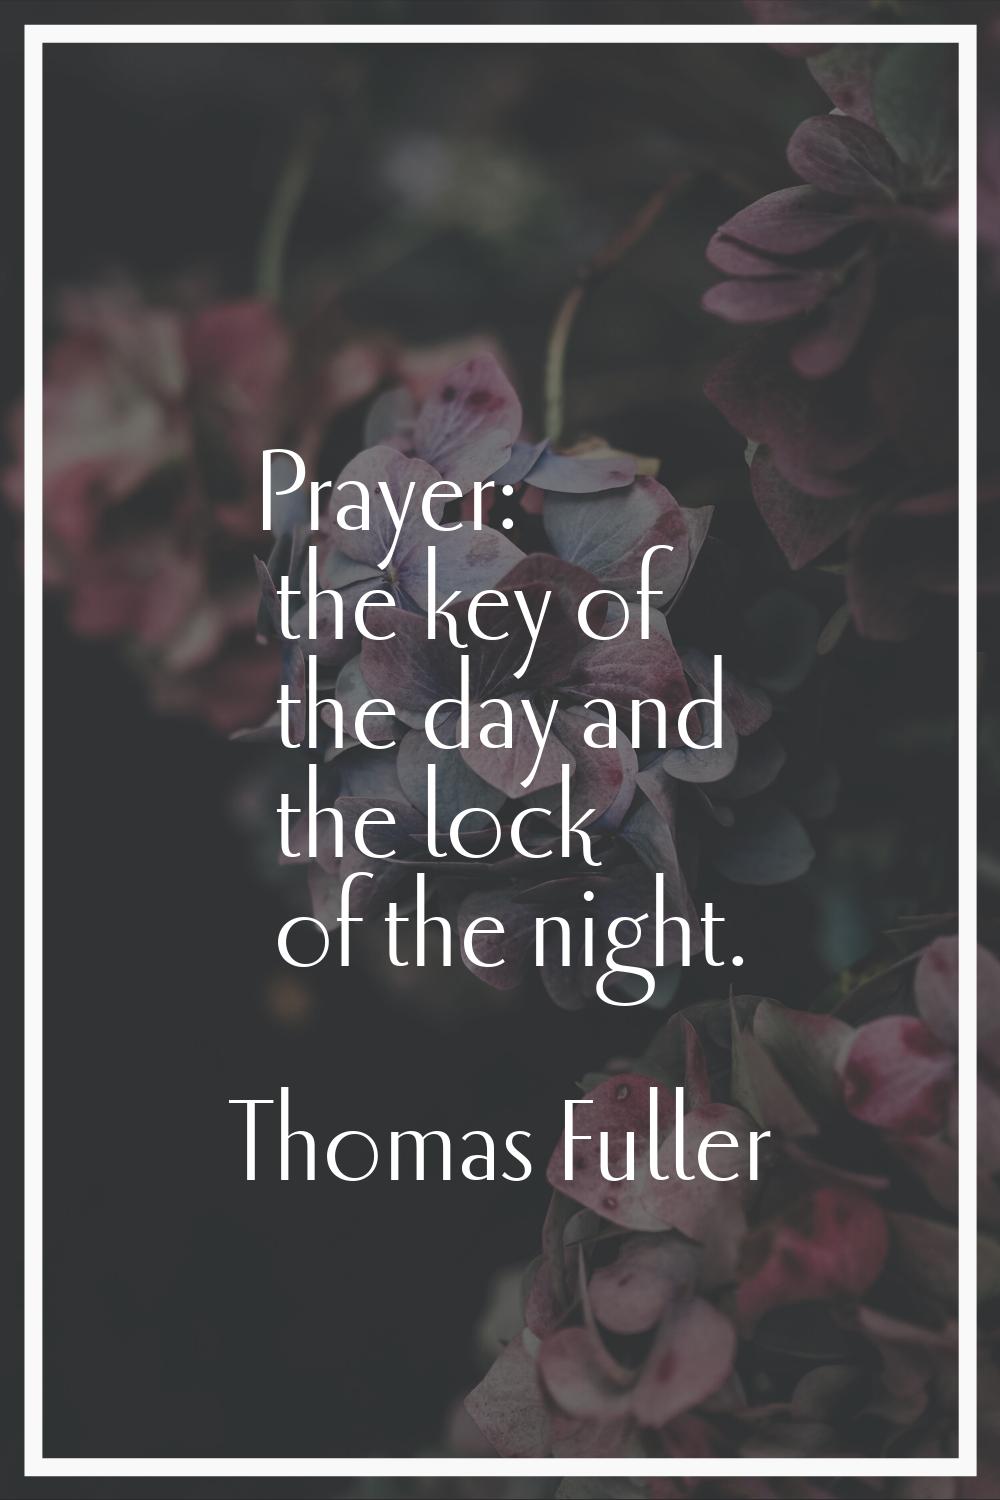 Prayer: the key of the day and the lock of the night.